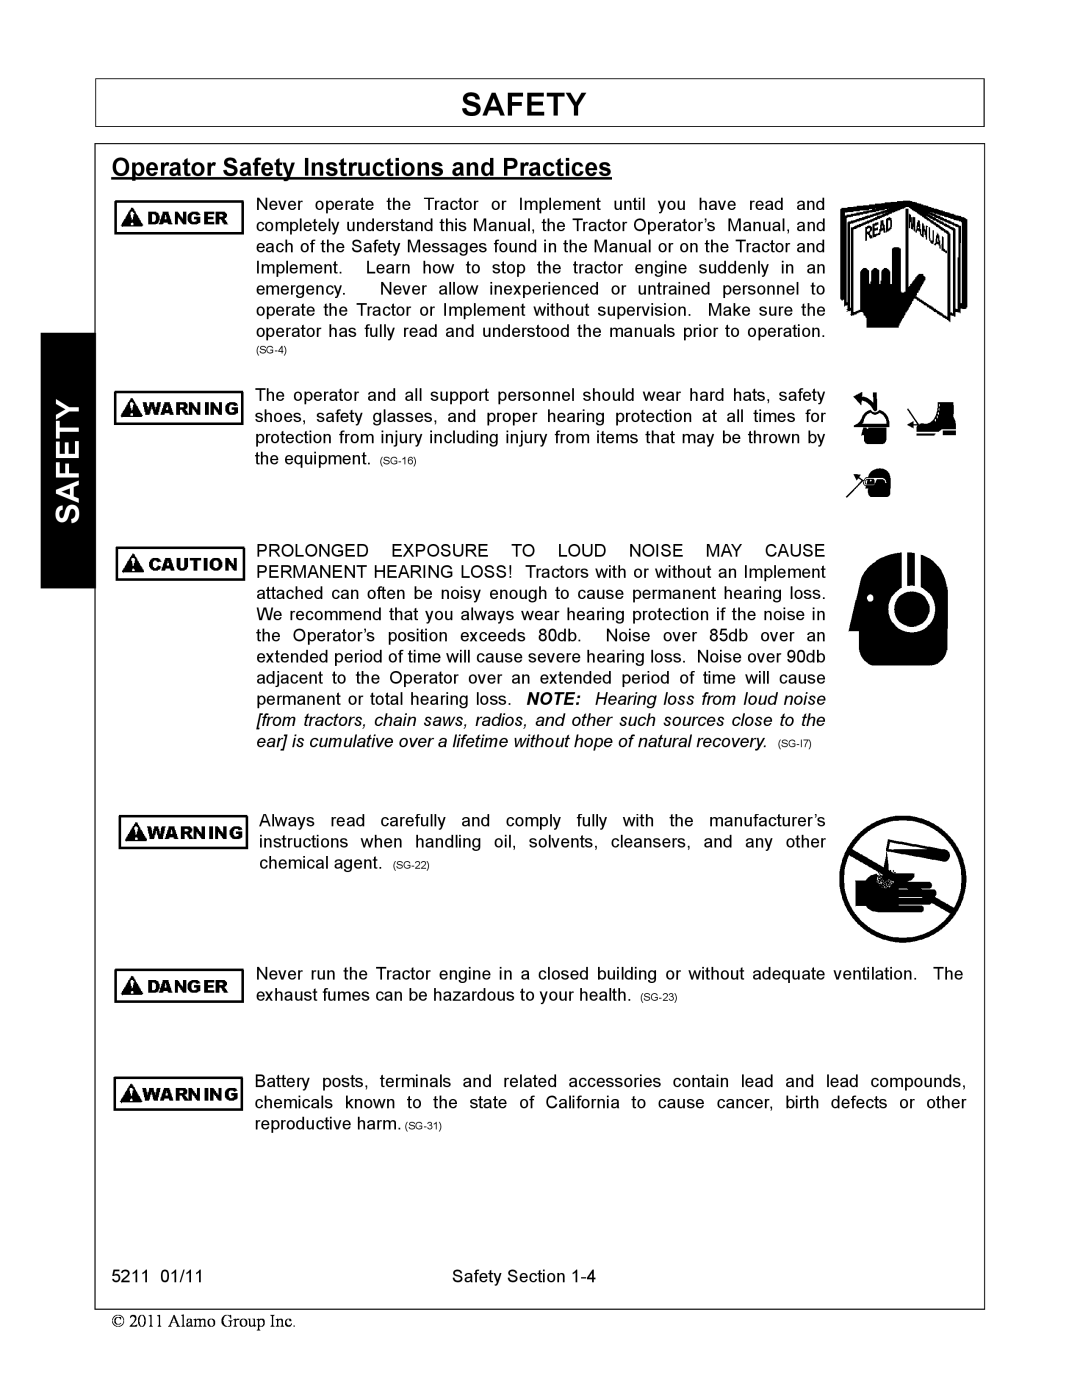 Servis-Rhino 5211 manual Operator Safety Instructions and Practices, SG-4 